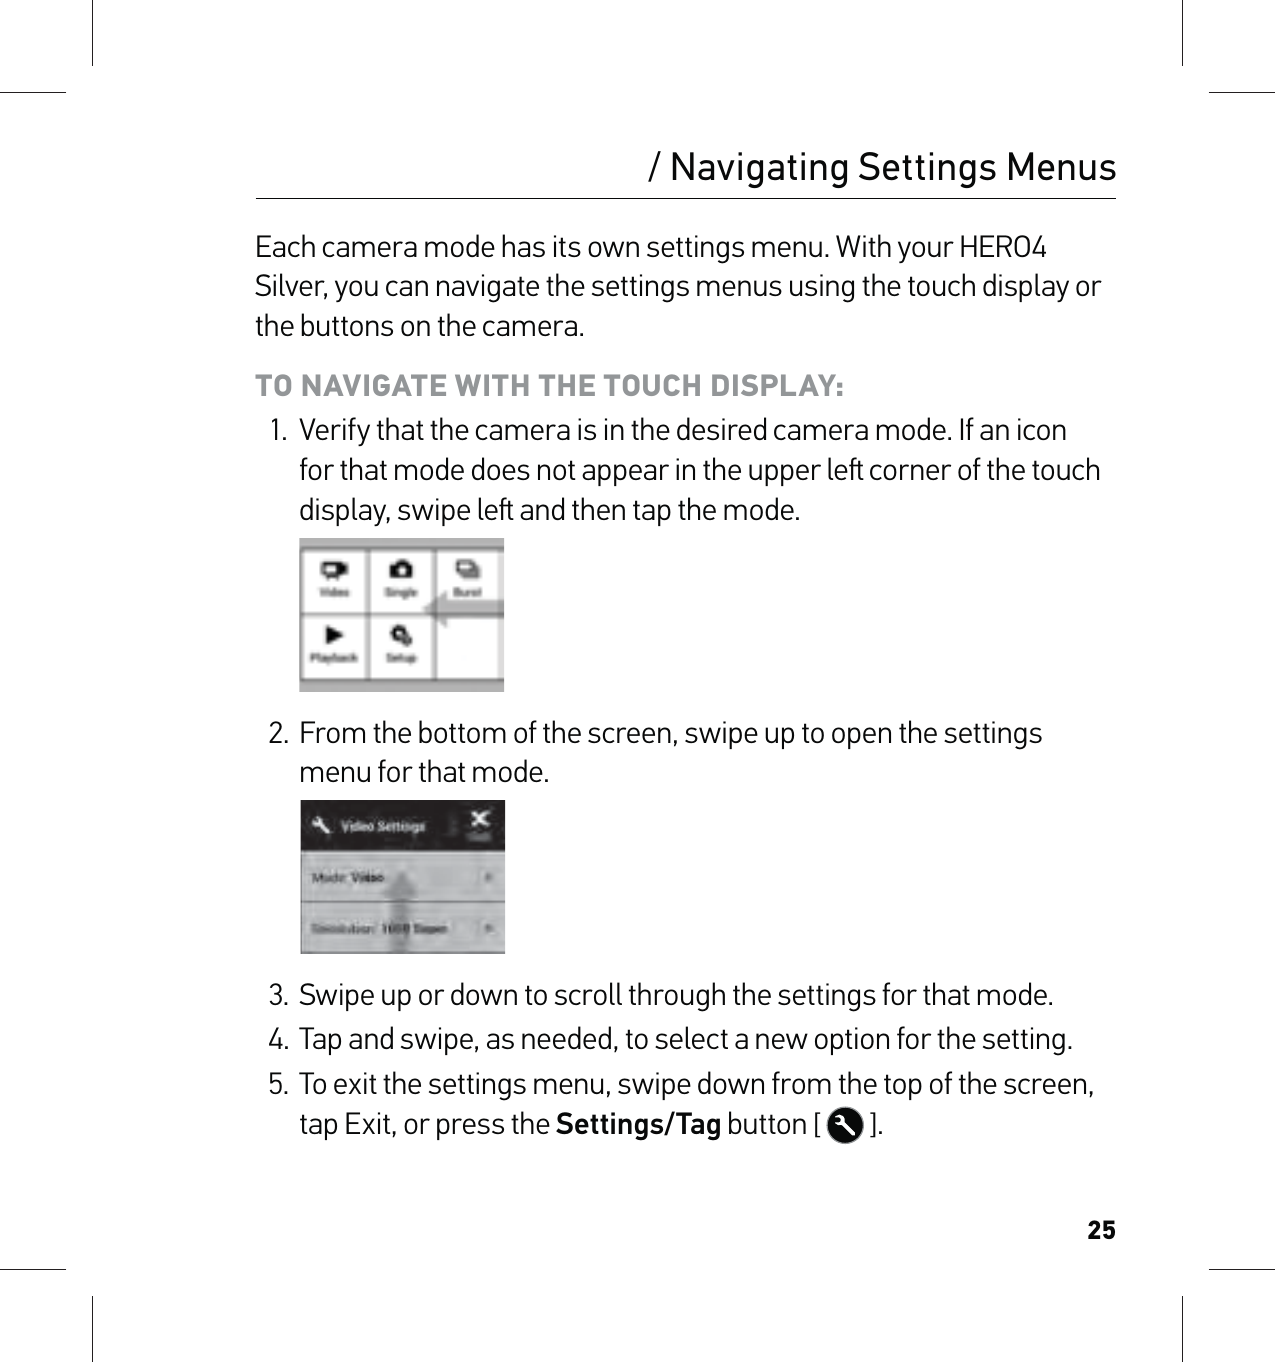 25Each camera mode has its own settings menu. With your HERO4 Silver, you can navigate the settings menus using the touch display or the buttons on the camera. TO NAVIGATE WITH THE TOUCH DISPLAY:1.  Verify that the camera is in the desired camera mode. If an icon for that mode does not appear in the upper le corner of the touch display, swipe le and then tap the mode.2. From the bottom of the screen, swipe up to open the settings menu for that mode.3.  Swipe up or down to scroll through the settings for that mode.4. Tap and swipe, as needed, to select a new option for the setting.5.  To exit the settings menu, swipe down from the top of the screen, tap Exit, or press the Settings/Tag button [  ]./ Navigating Settings Menus